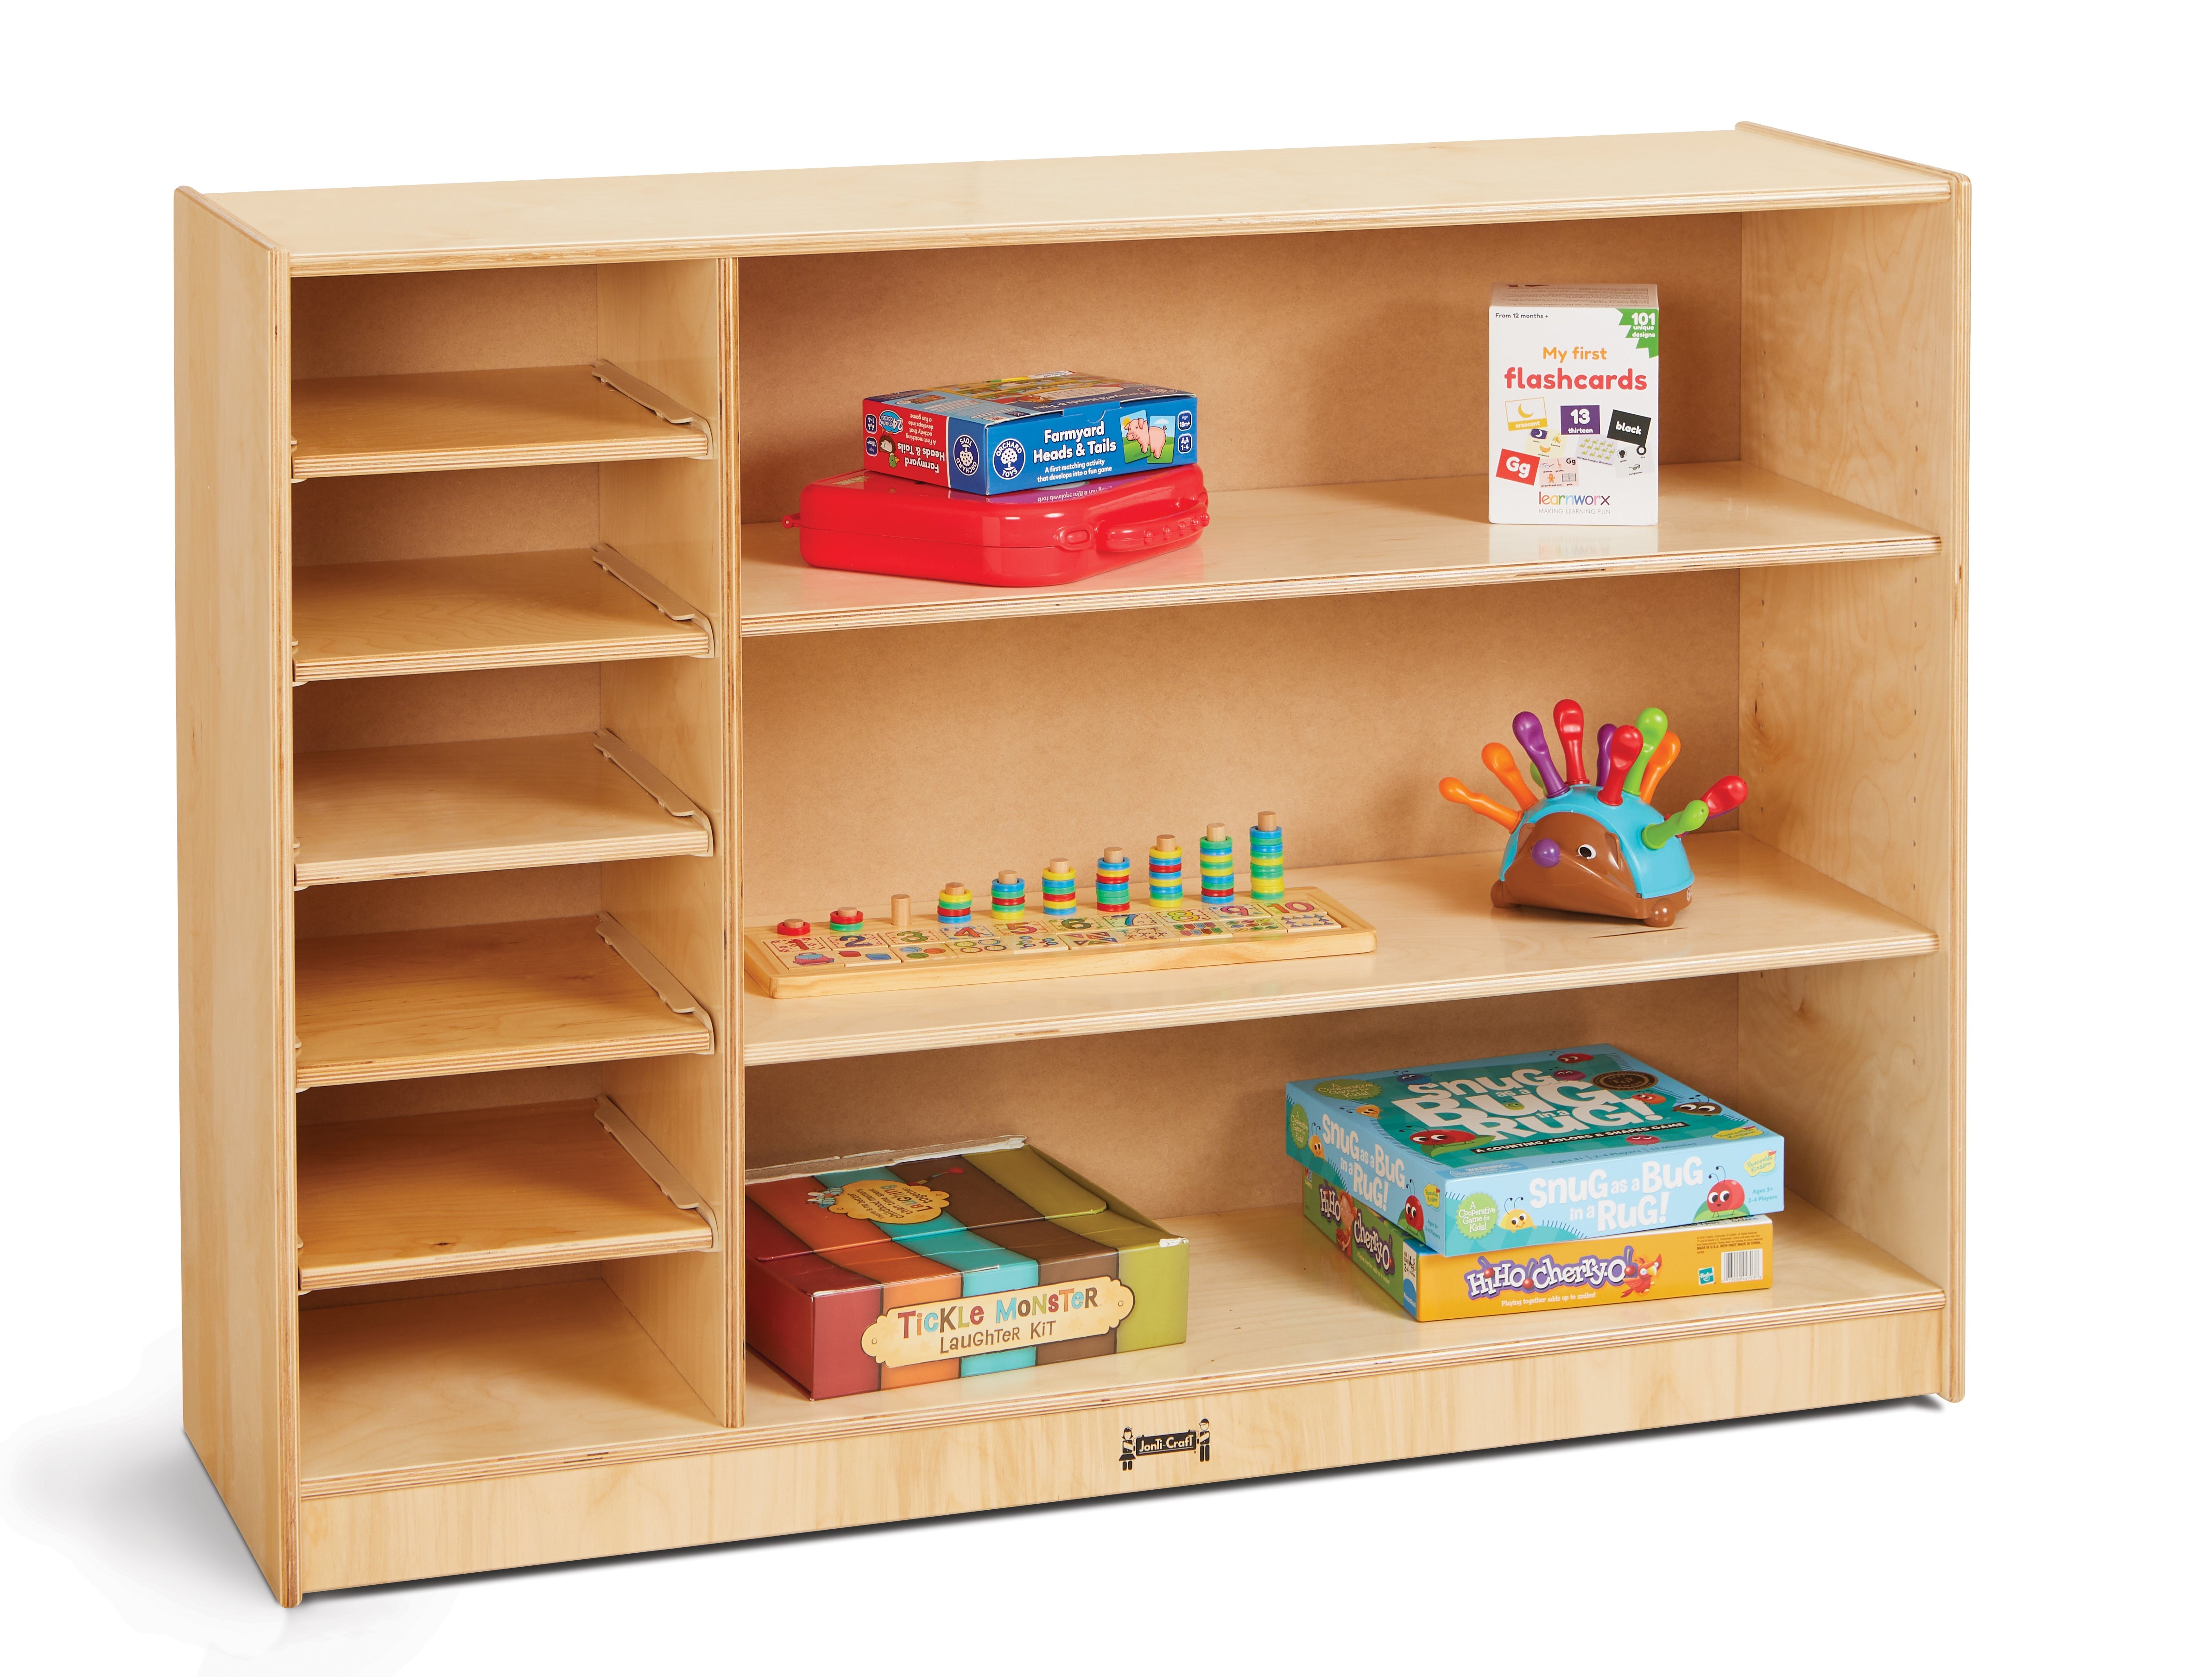 Jonti-Craft 24 Paper Tray Mobile Storage with Colored Paper Trays